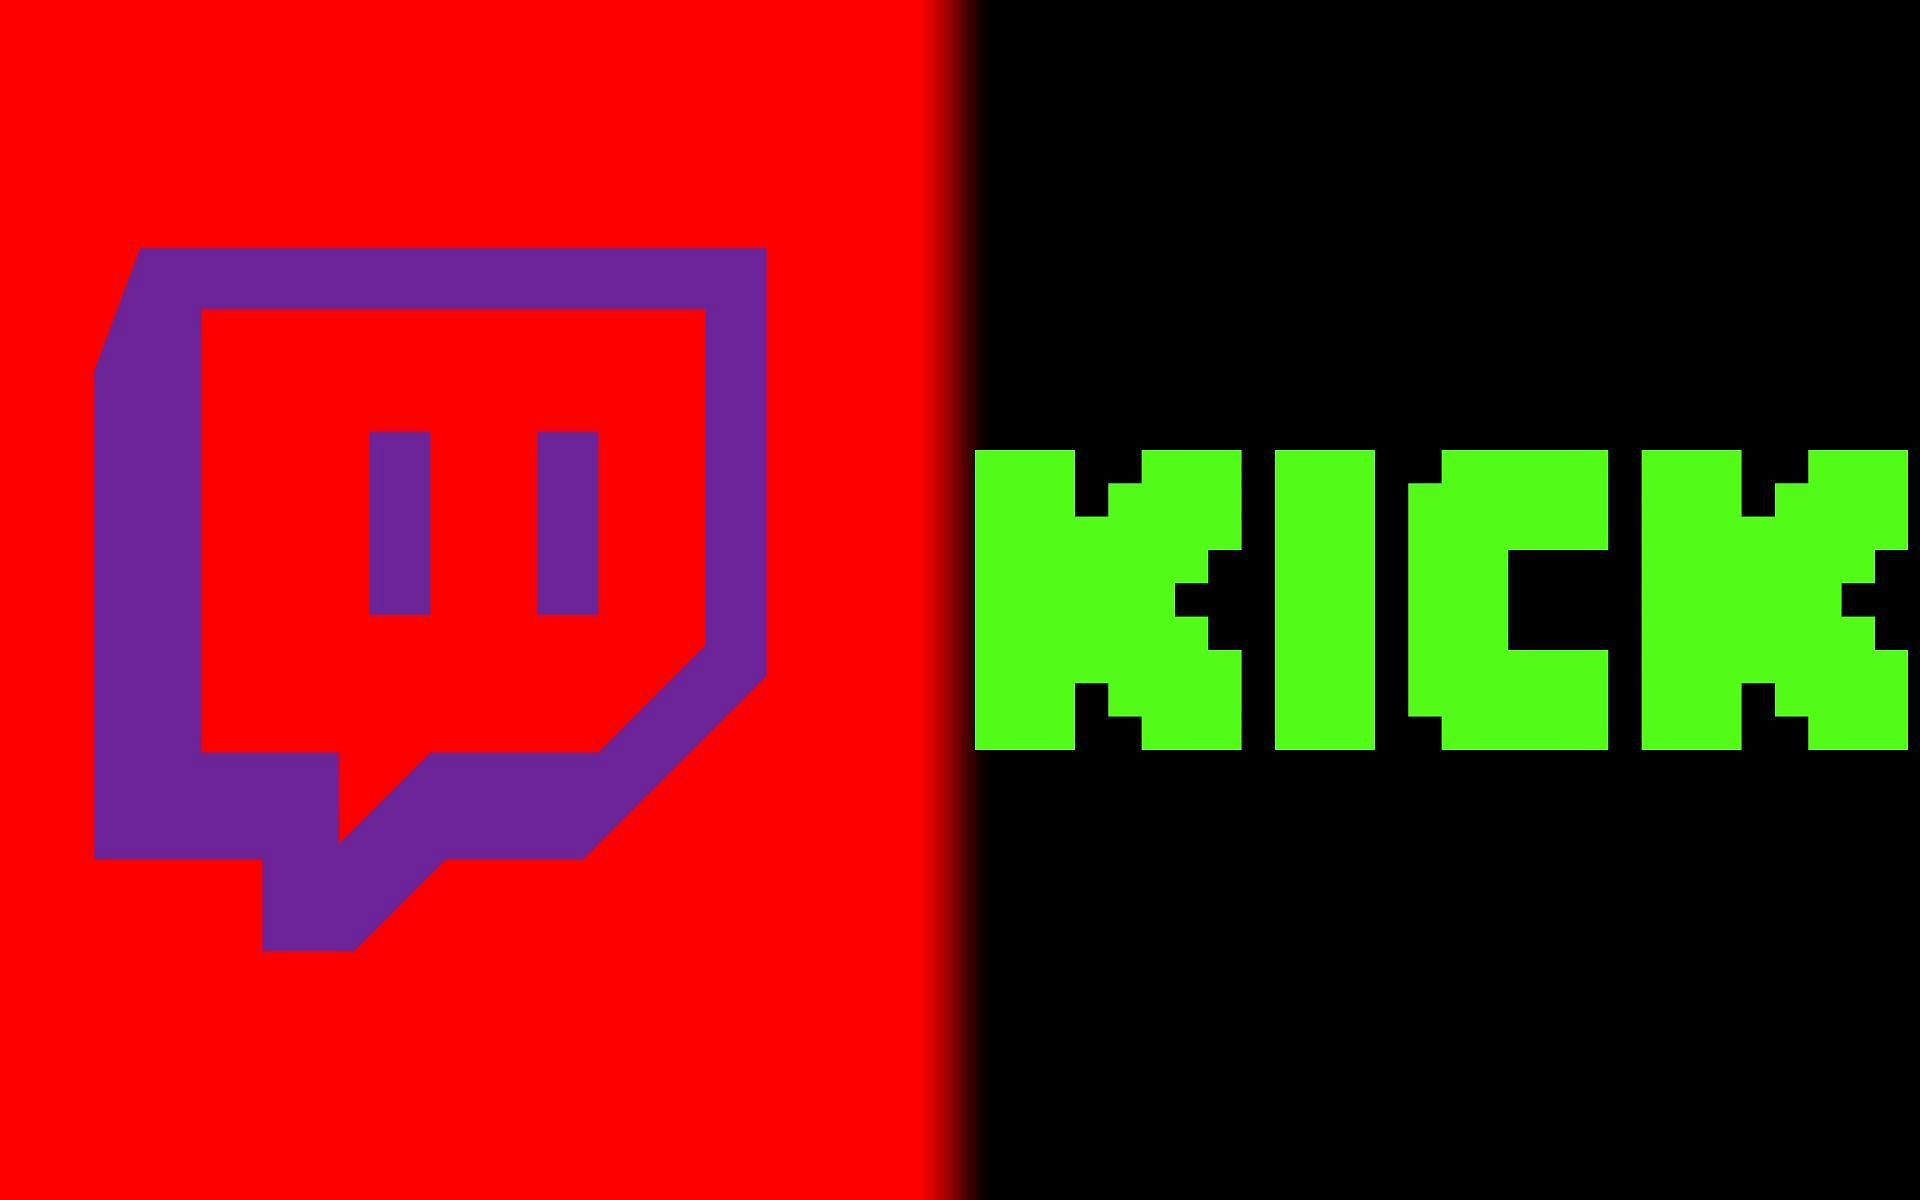 Kick co-founder responds as Amazon-owned platform lays off 35% of workforce (Image via Kick.com and Twitch.tv)